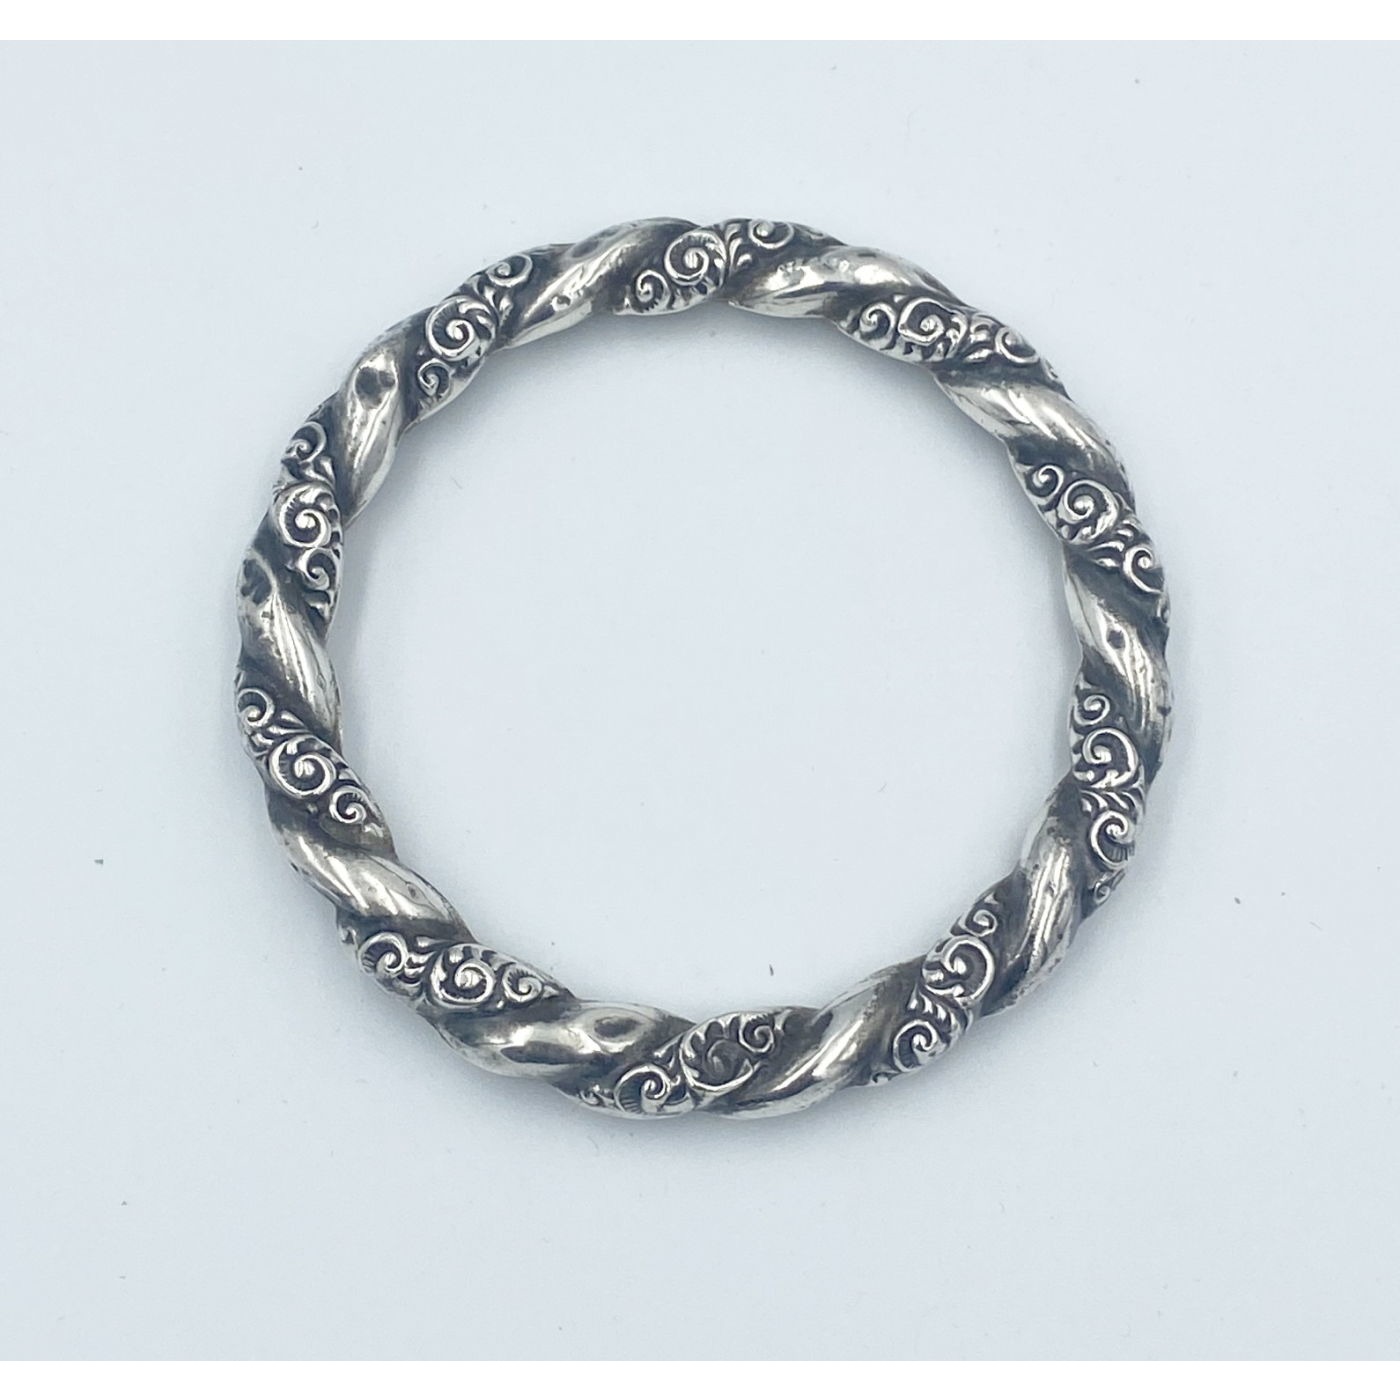 Lovely Sterling Silver Repousse Twist Bangle